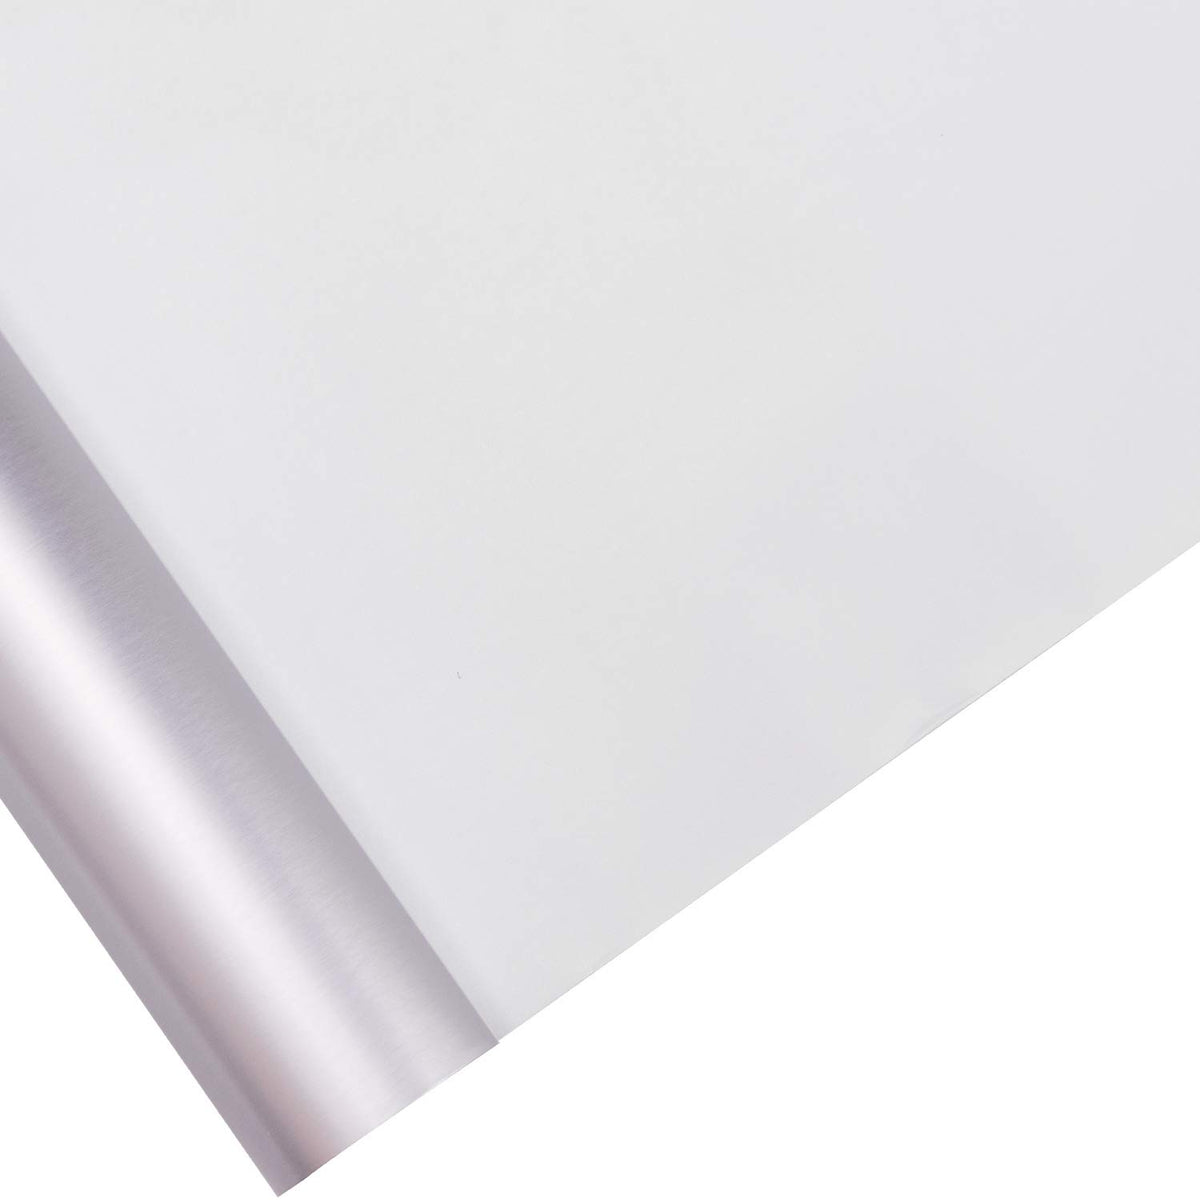 High-Quality Silver Matte Bulk Wrapping Paper - 520 Sq Ft at Jampaper